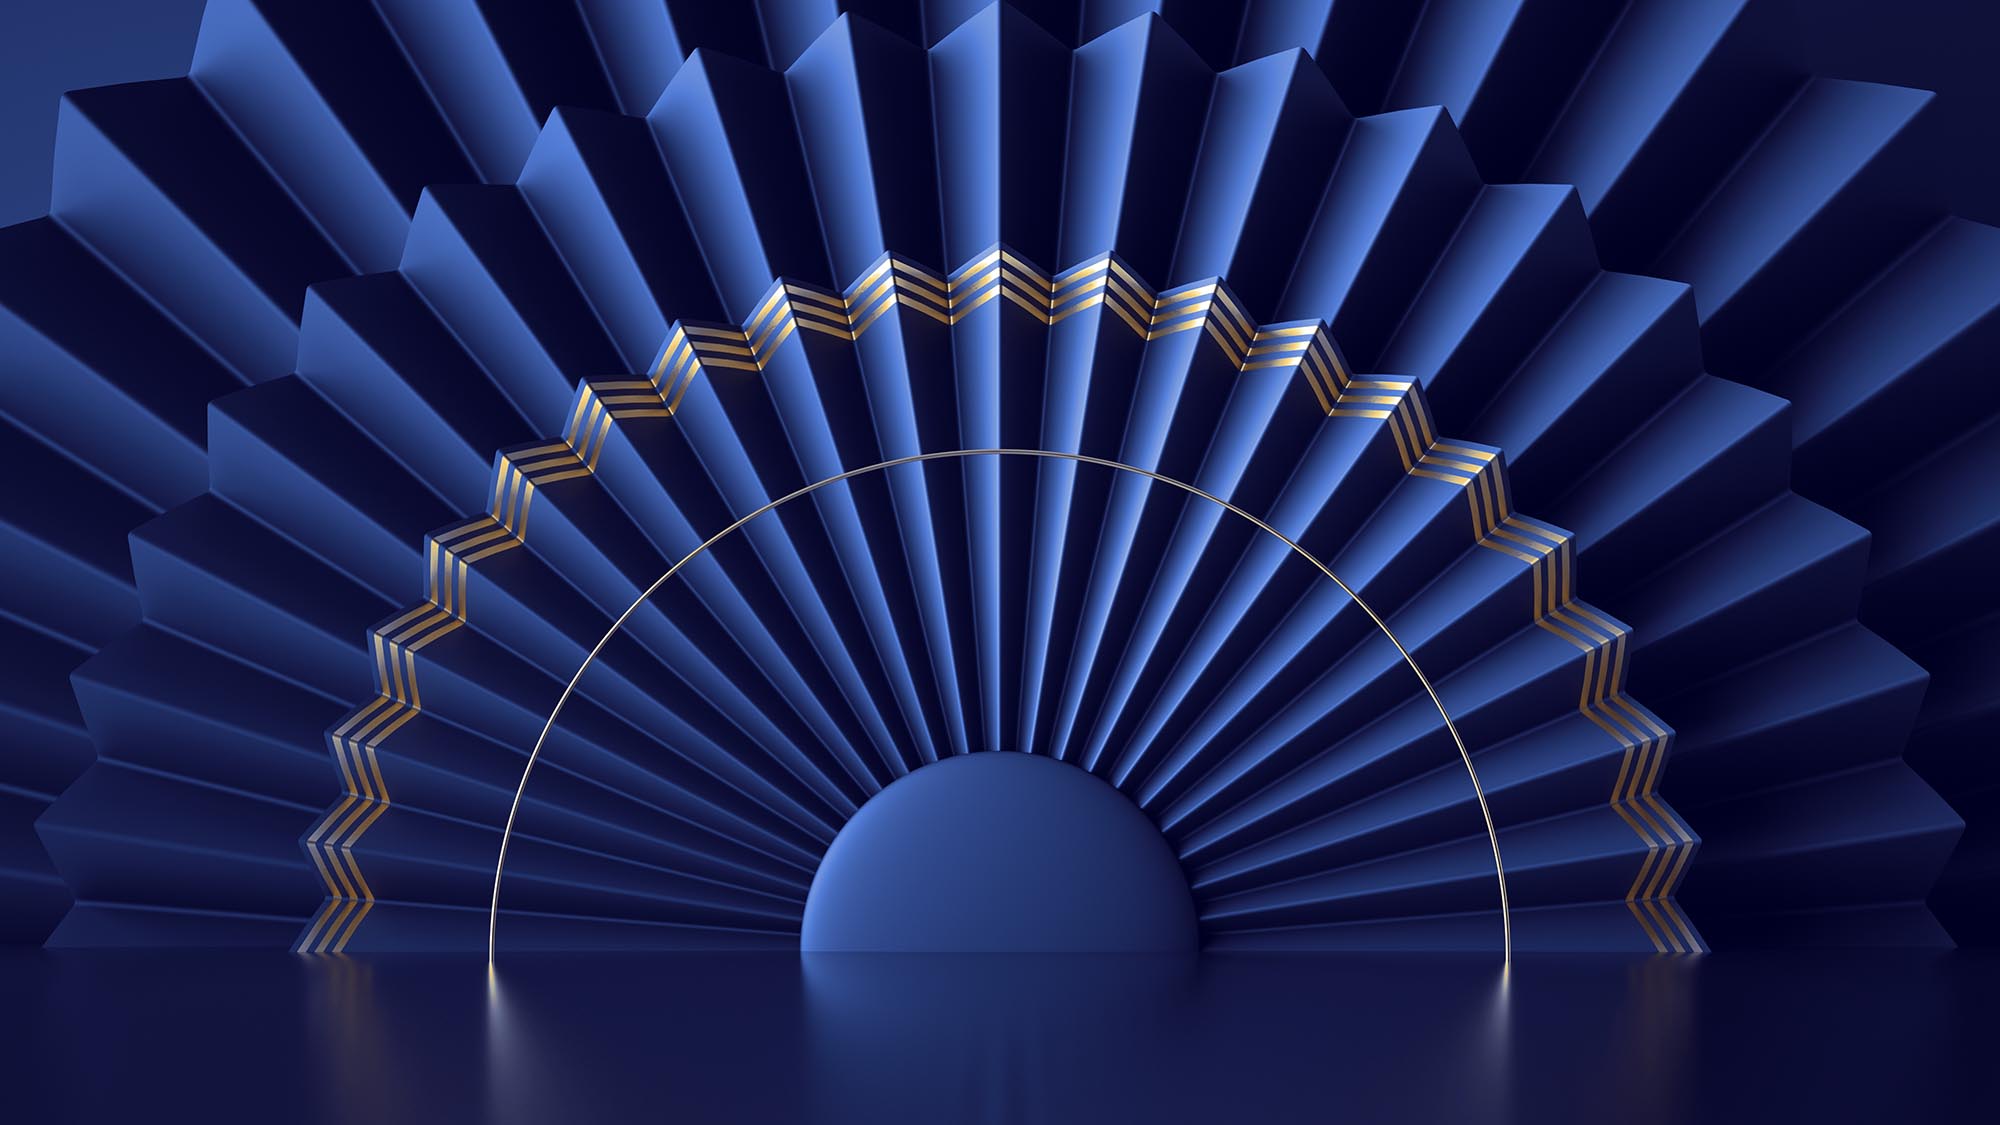 abstract art deco blue background with folded fan and golden lines